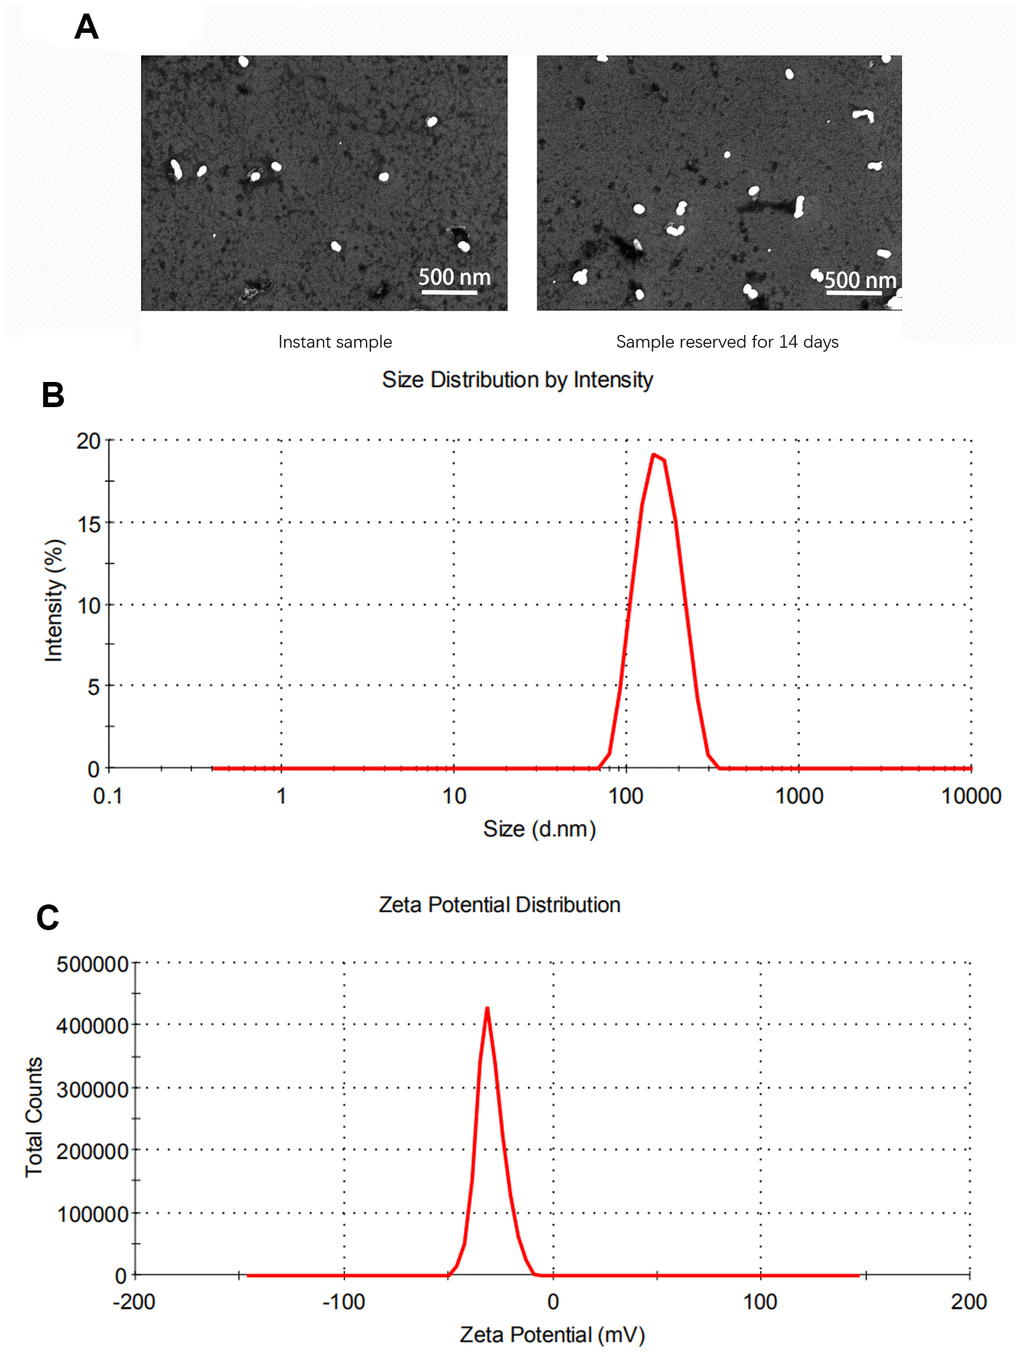 Characterization of solid lipid nanoparticles (SLNs). (A) The representative images of SLNs using transmission electron microscopy. (B) The size distribution of SLNs. (C) The zeta potential distribution of SLNs.